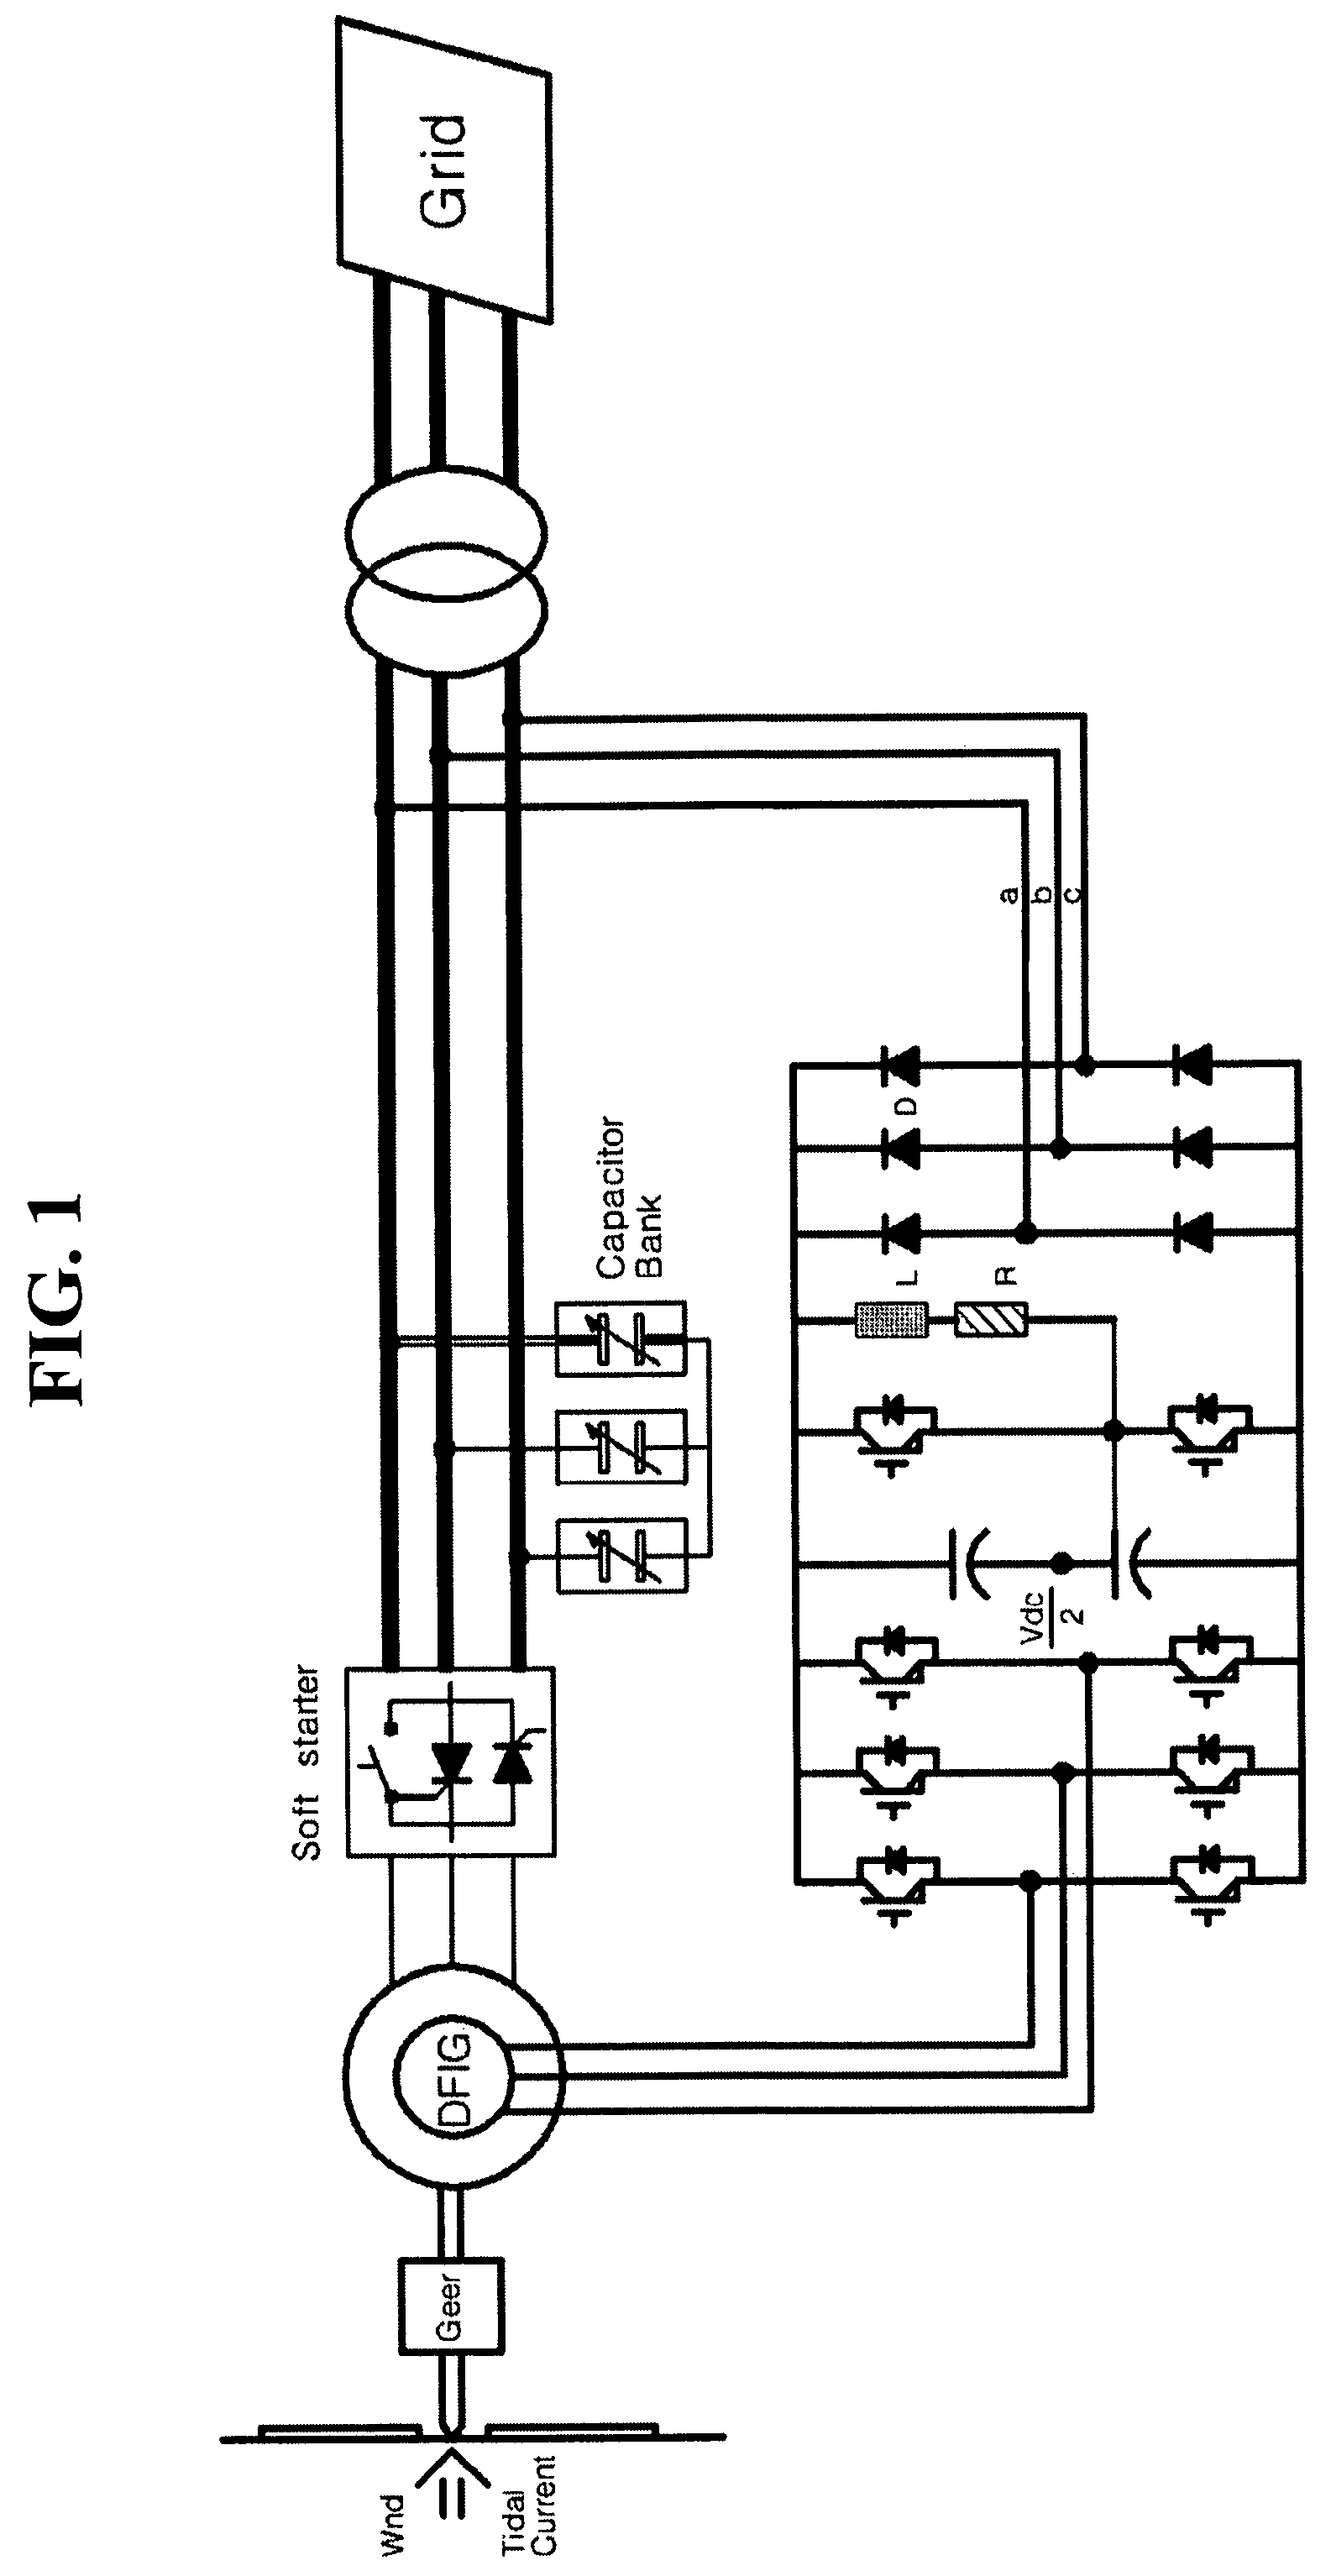 Controller of doubly-fed induction generator